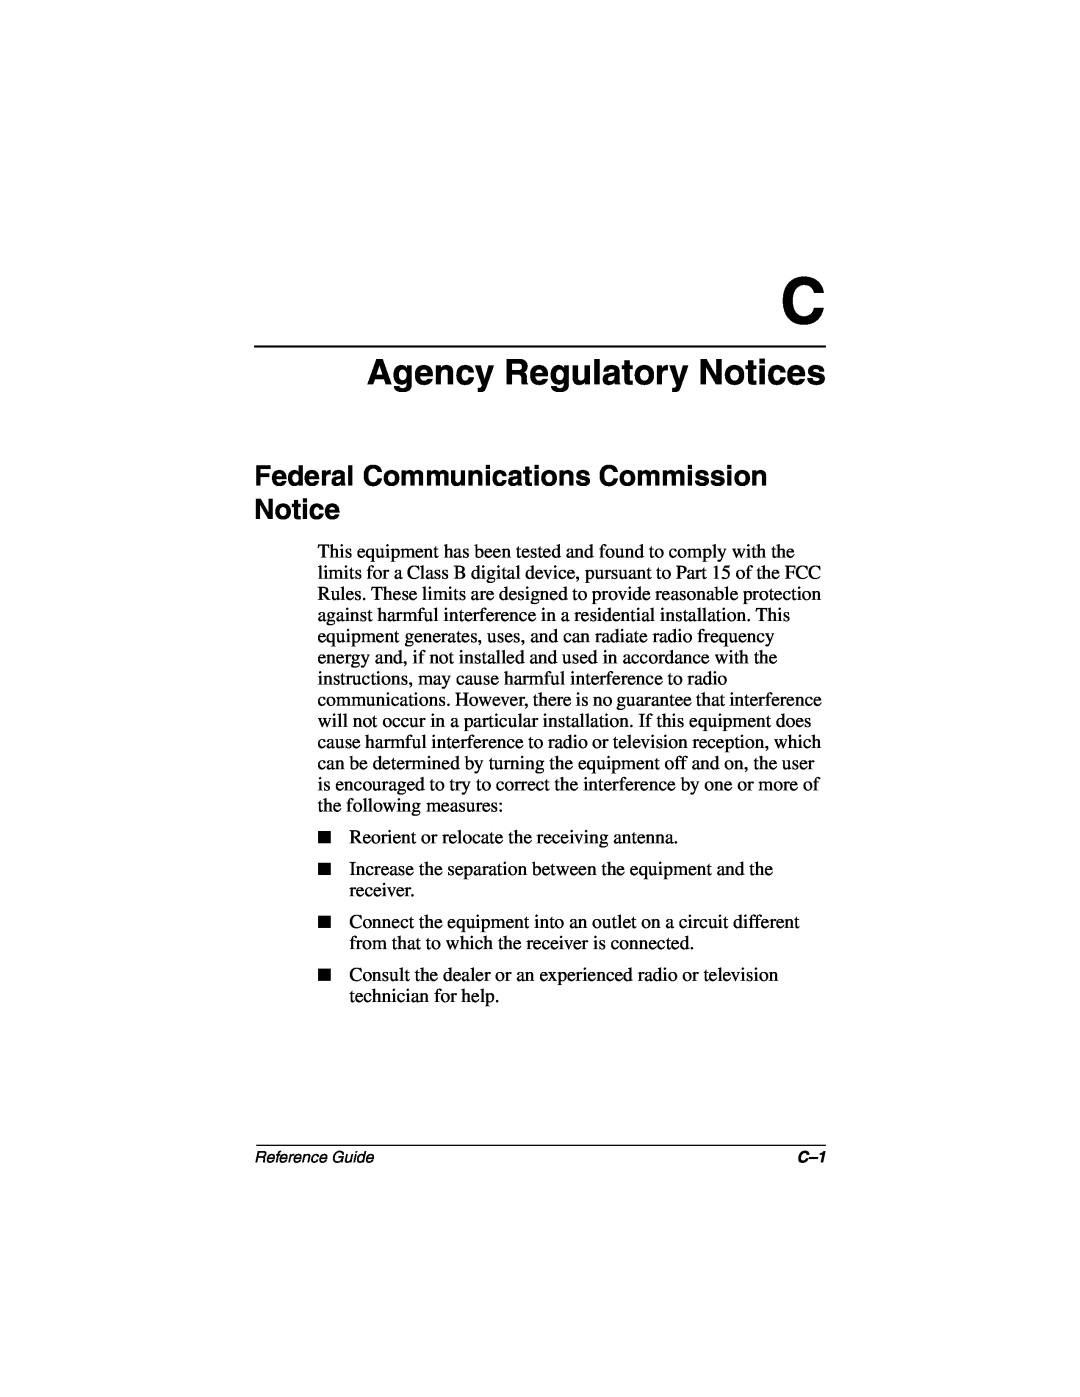 Compaq 5017 manual Agency Regulatory Notices, Federal Communications Commission Notice 